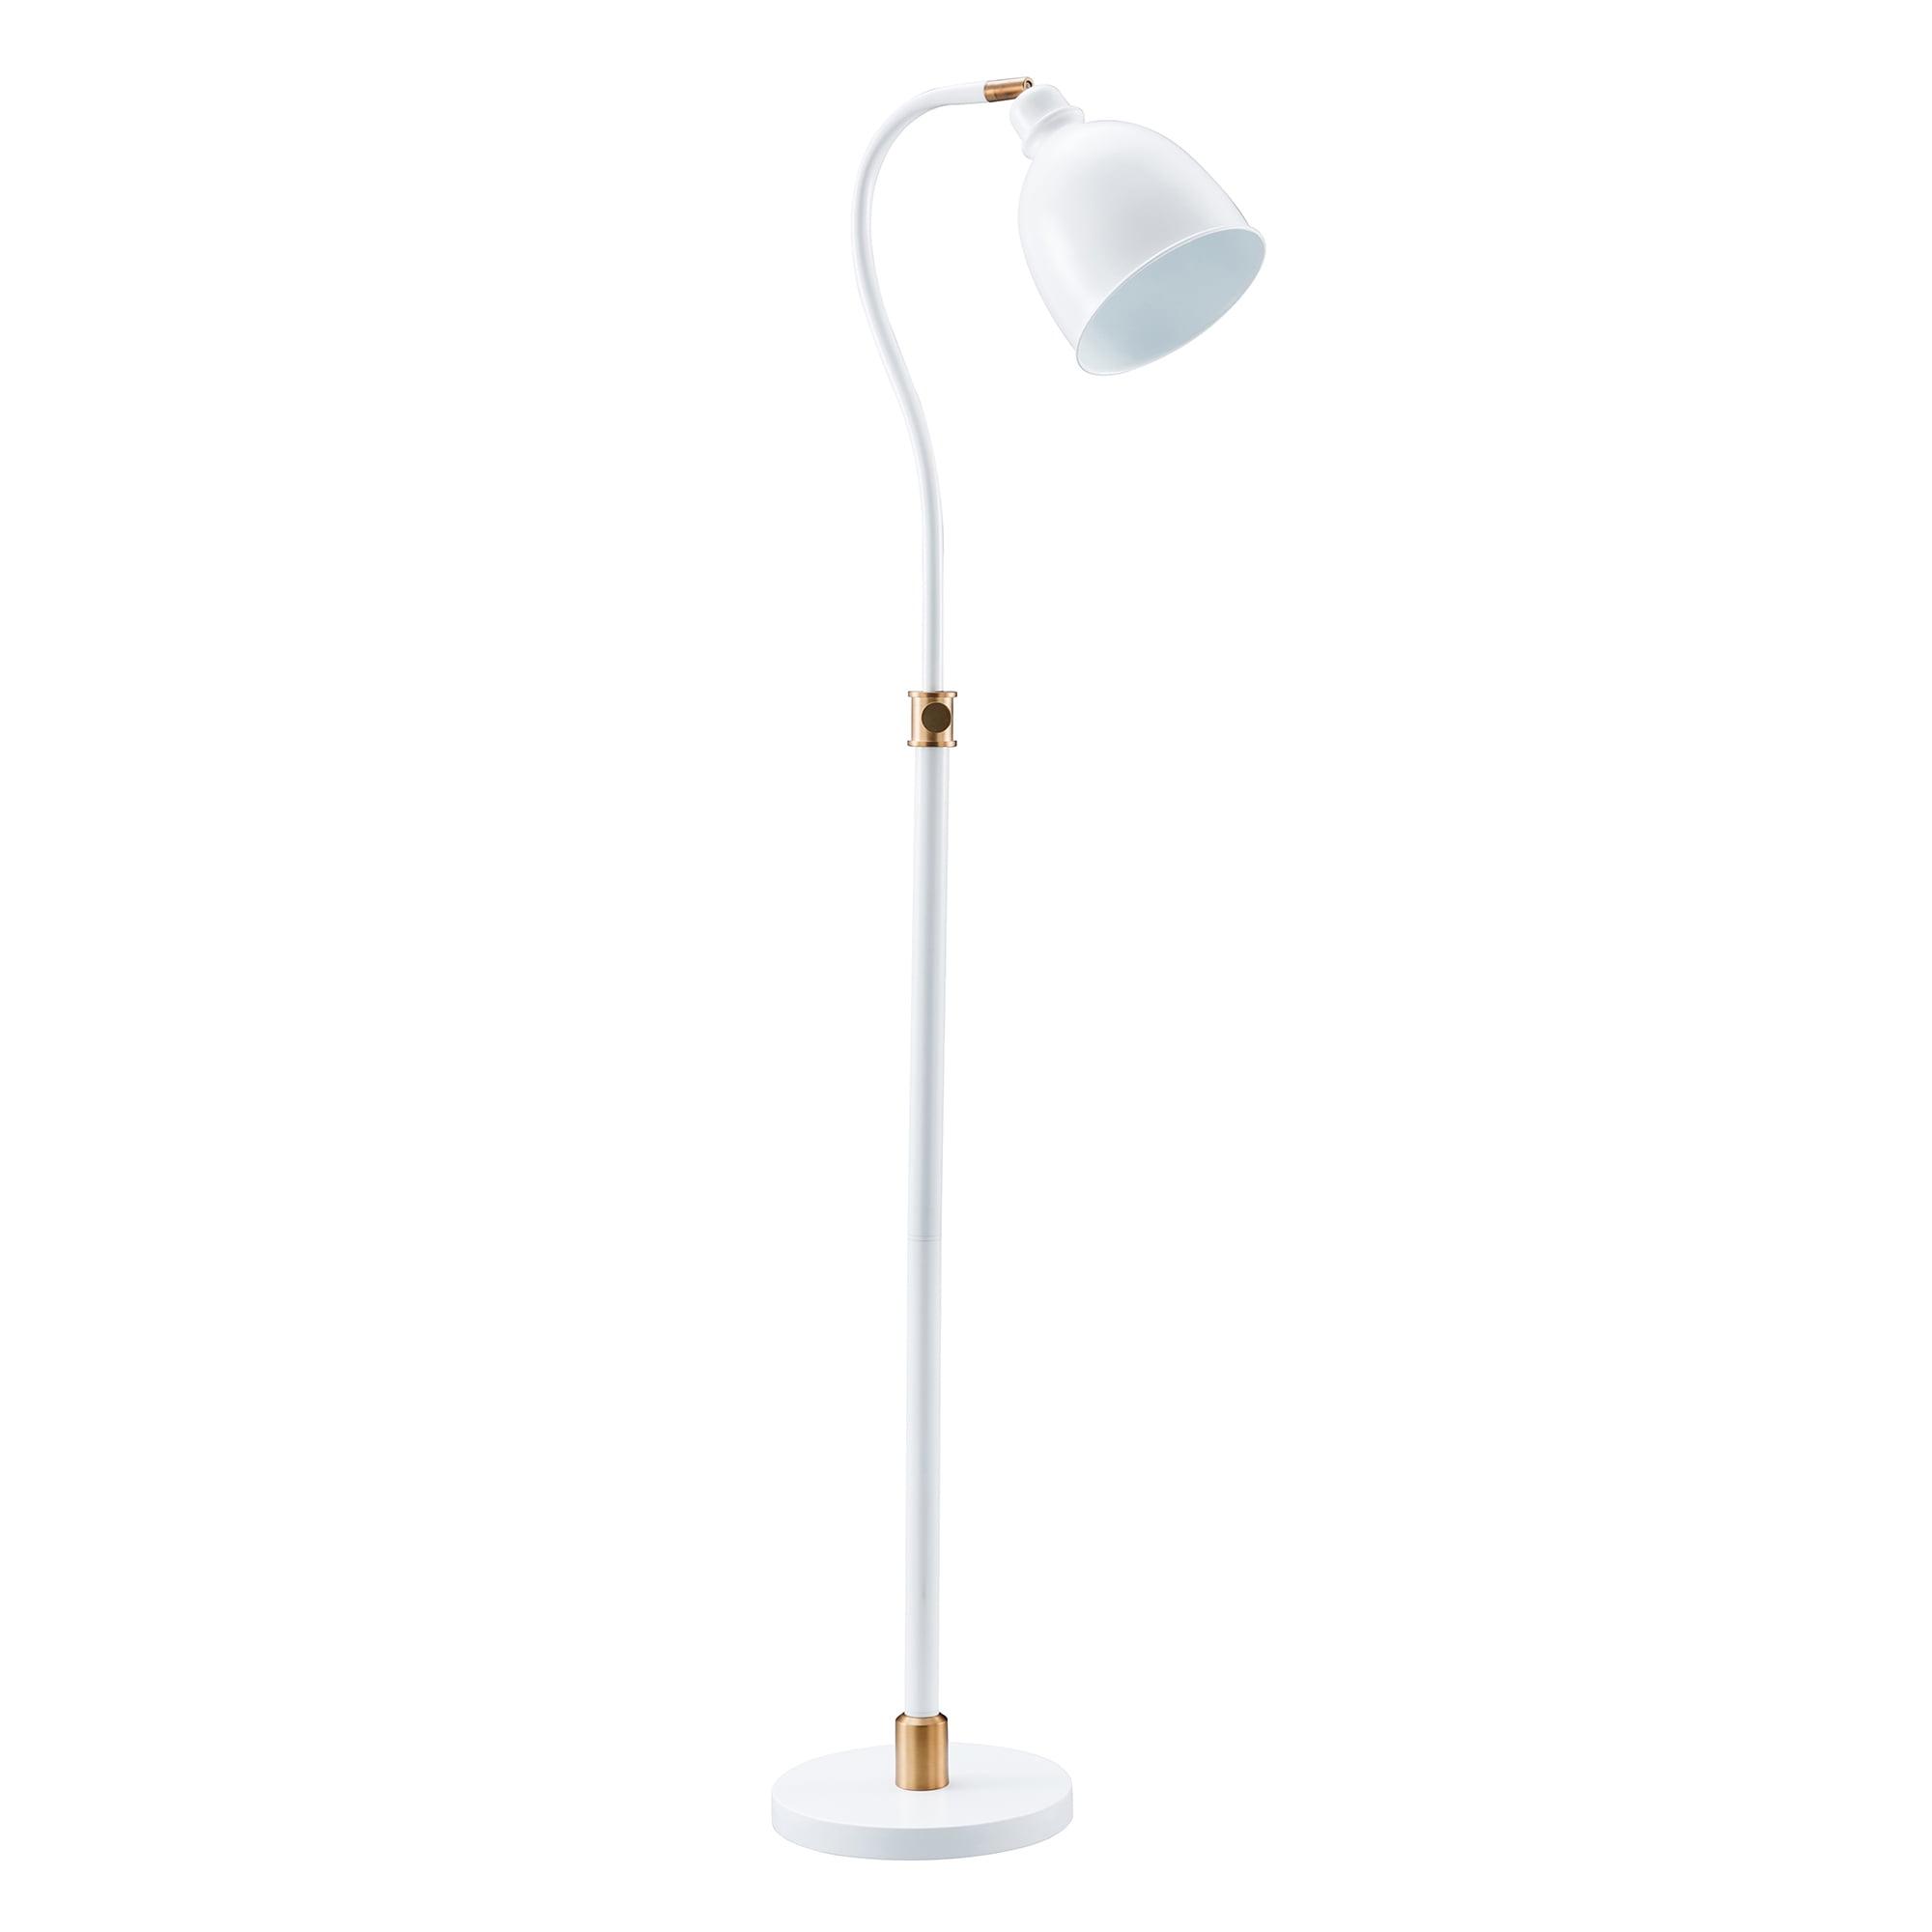 Matte White and Brass Adjustable Arc Floor Lamp with Smart Home Compatibility